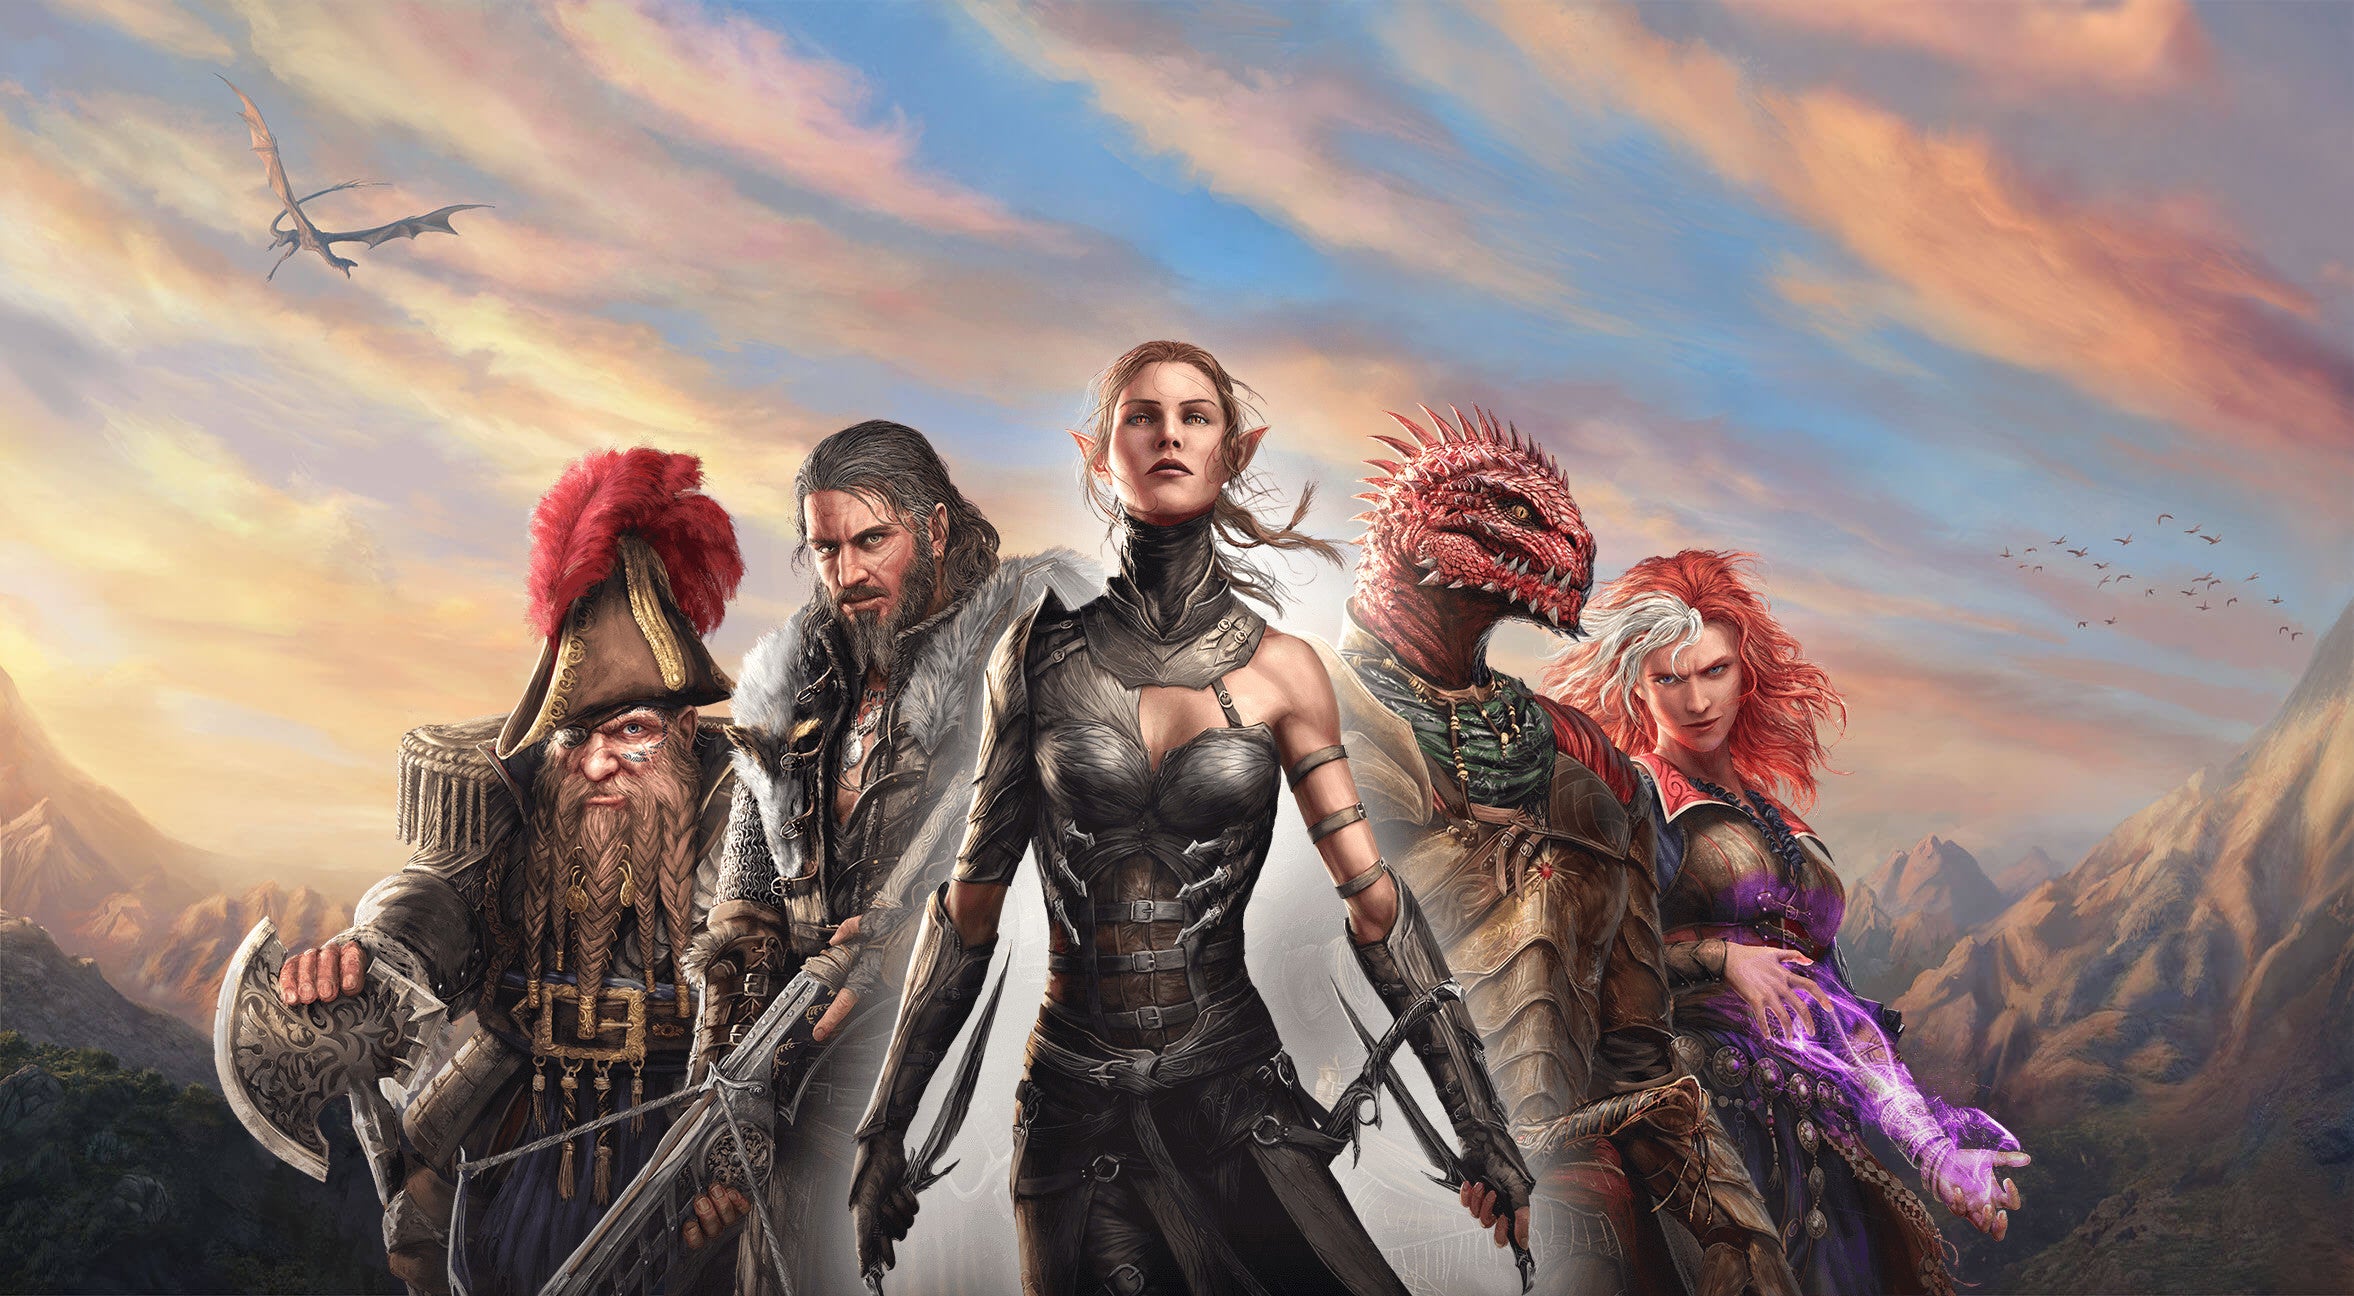 Image for Divinity: Original Sin 2 is out today, and has dethroned PUBG as Steam's top seller